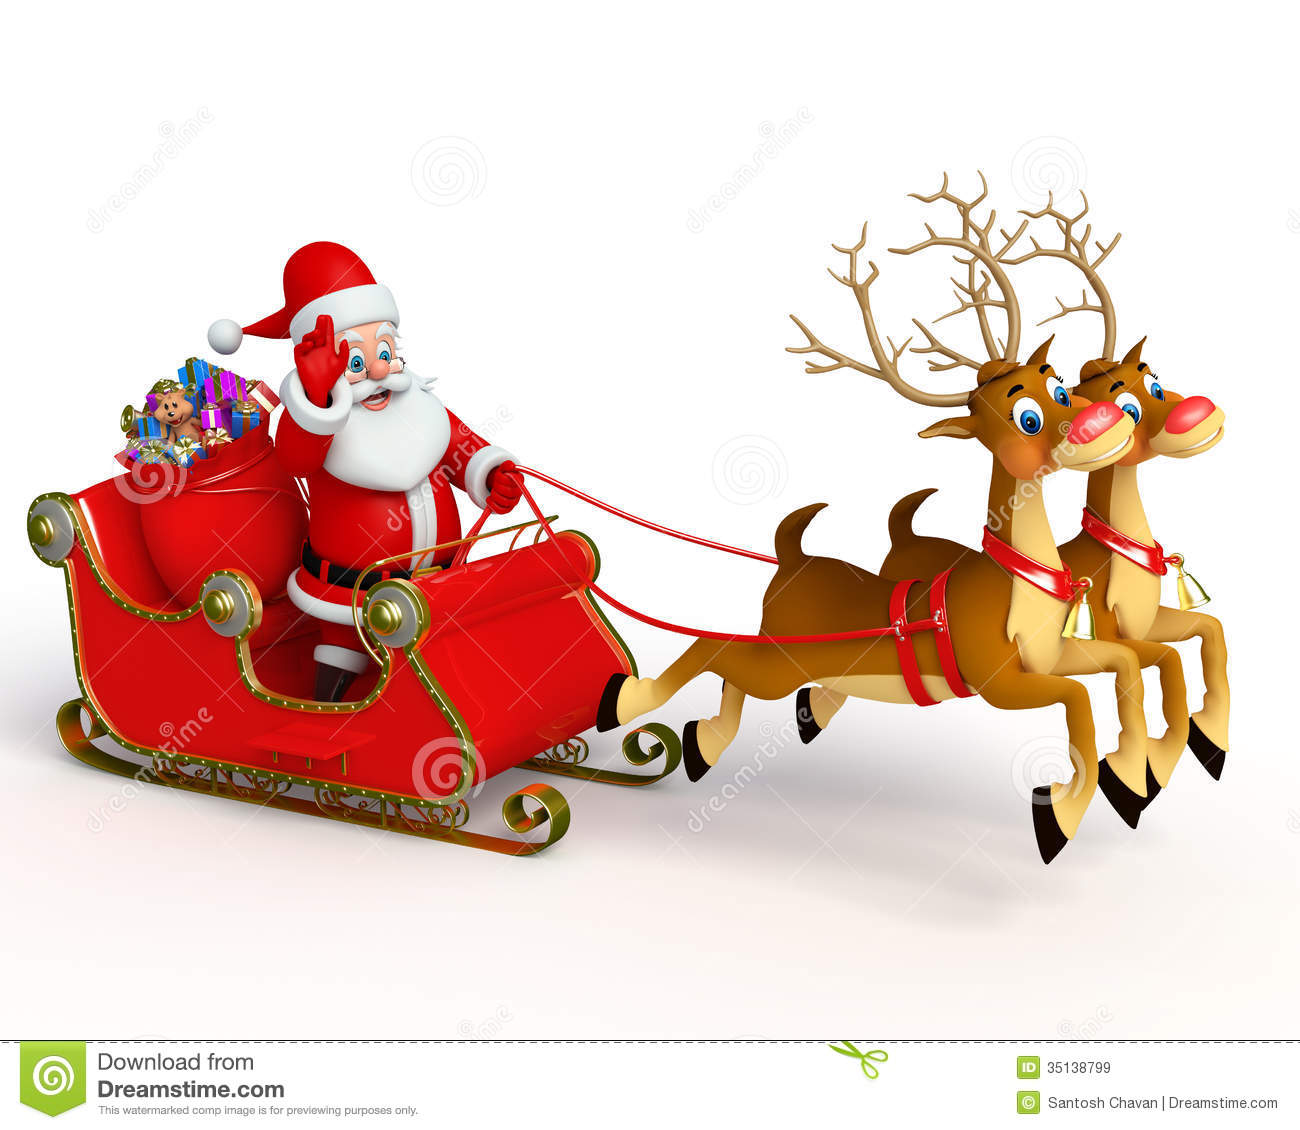 Free Stock Images  Santa Claus With His Sleigh  Image  35138799